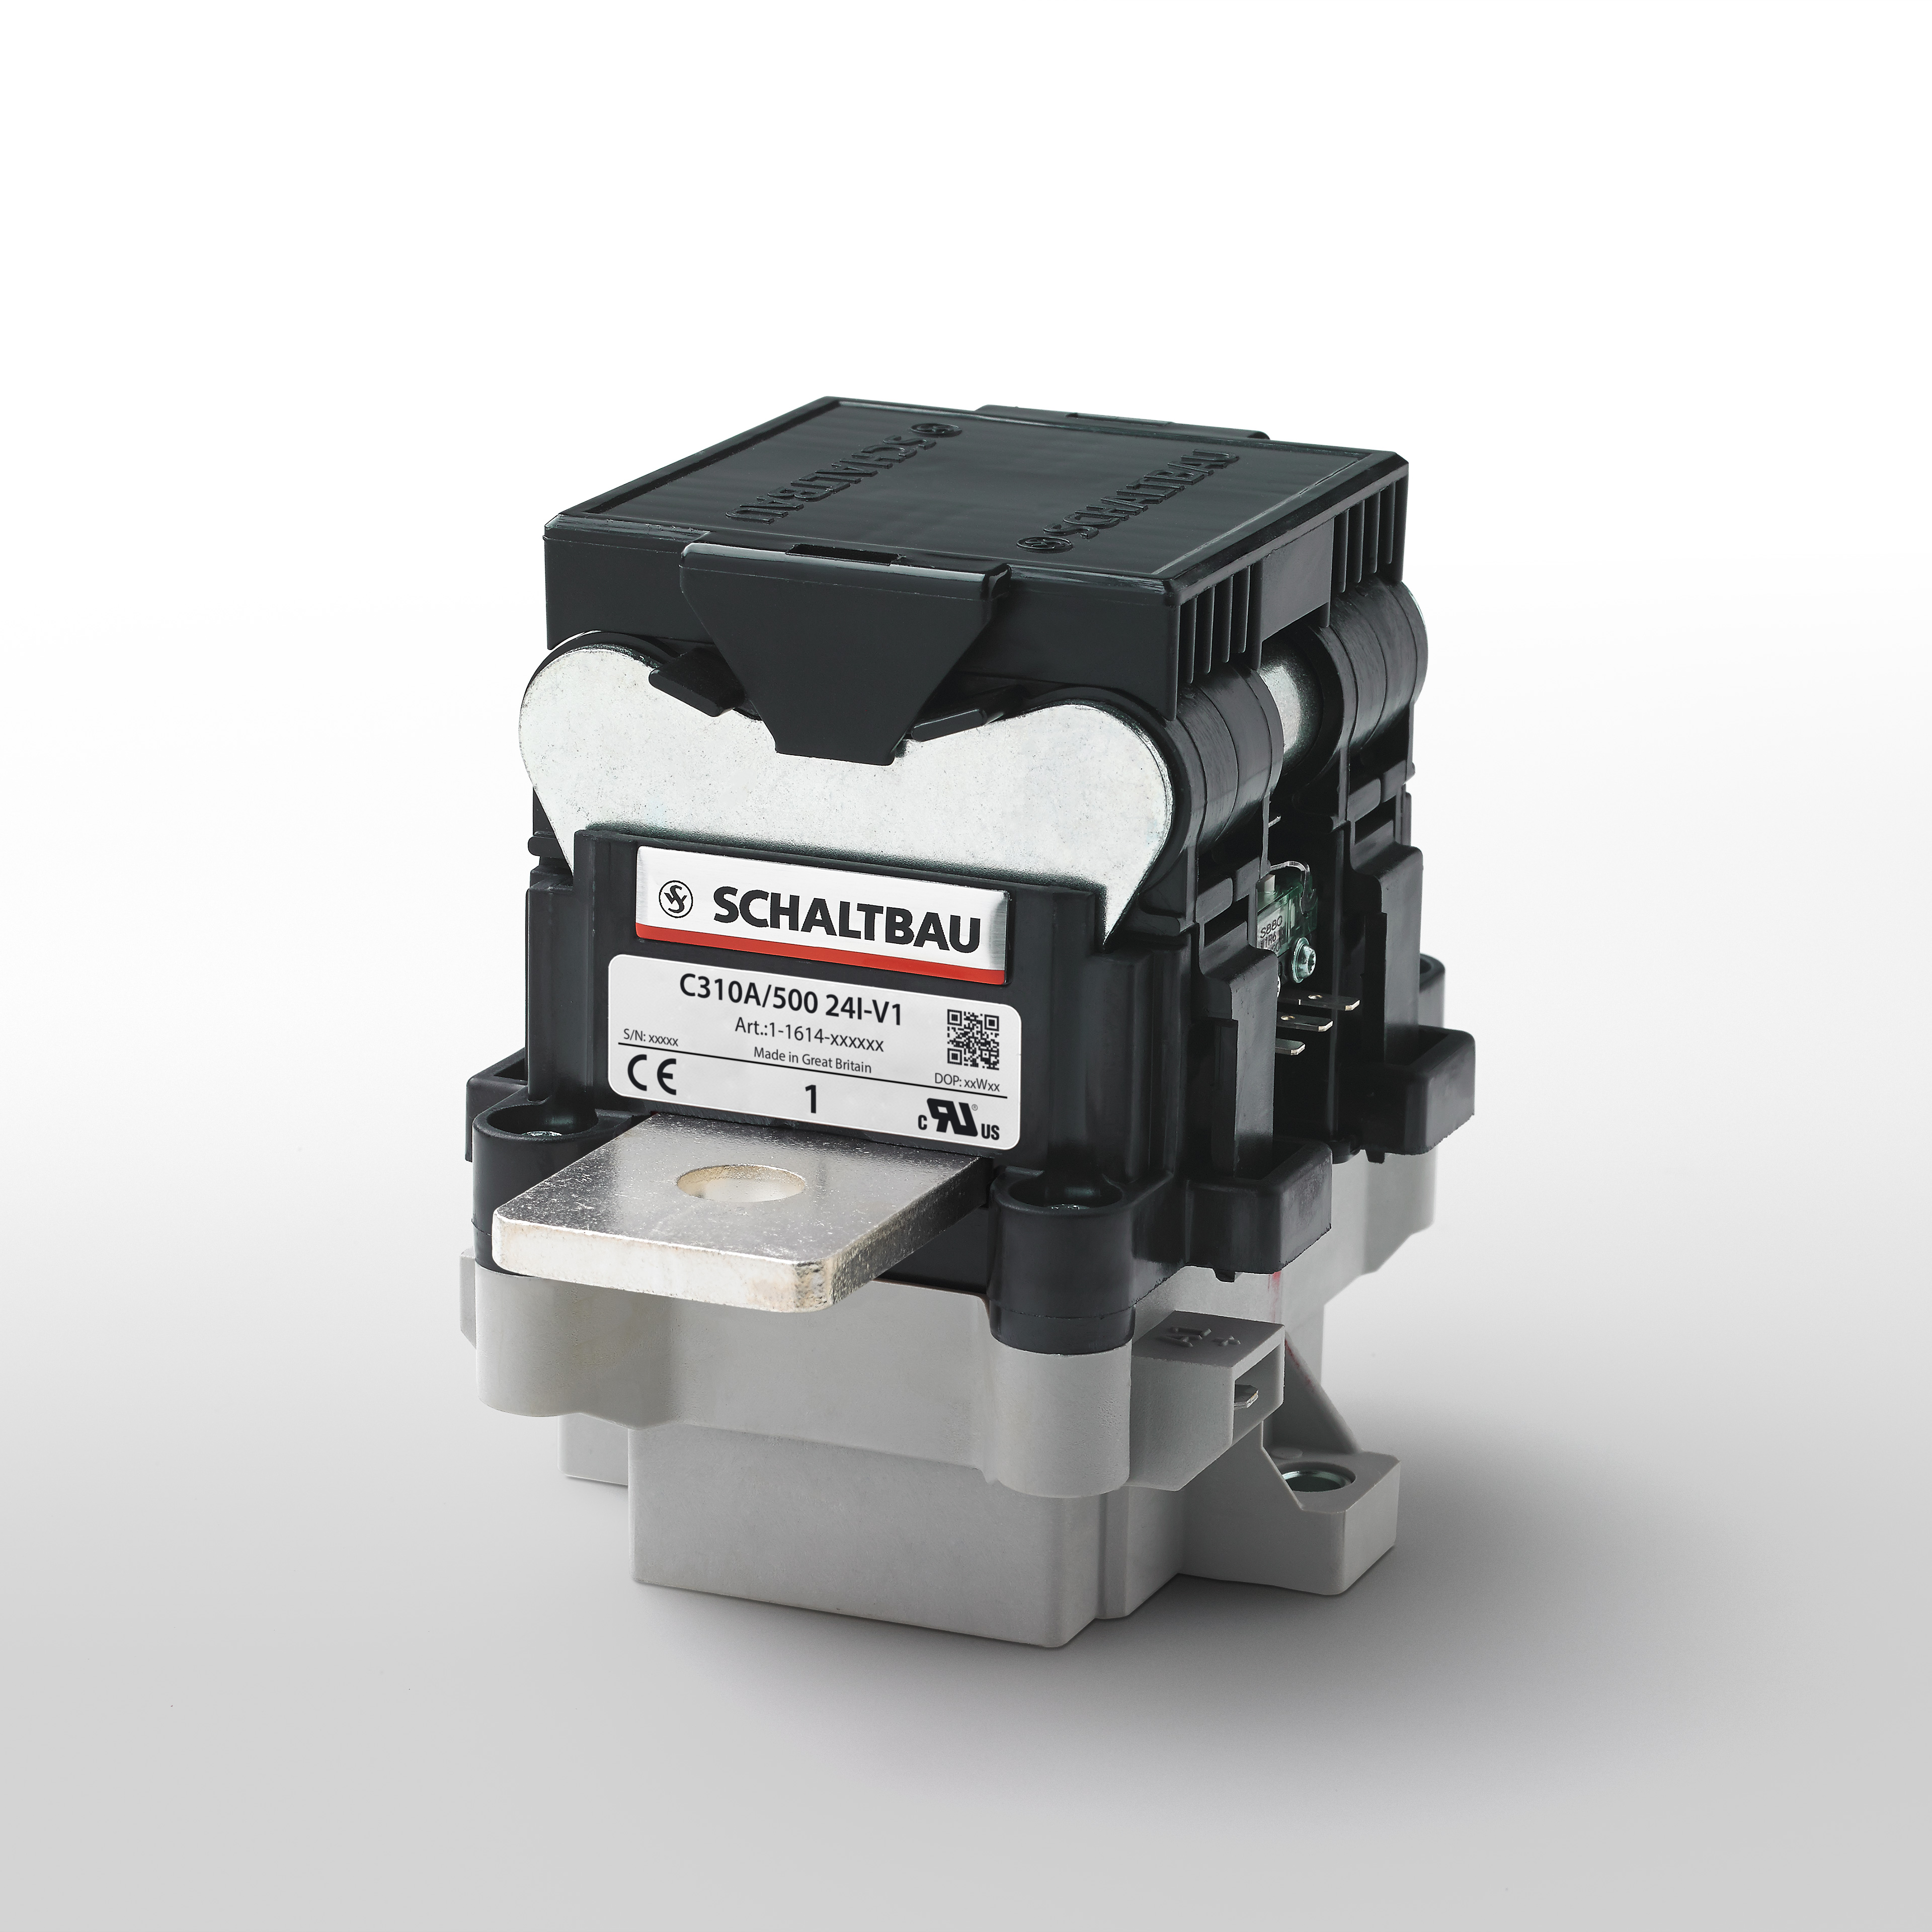 C310 – AC and bidirectional DC contactors up to 1,500 V